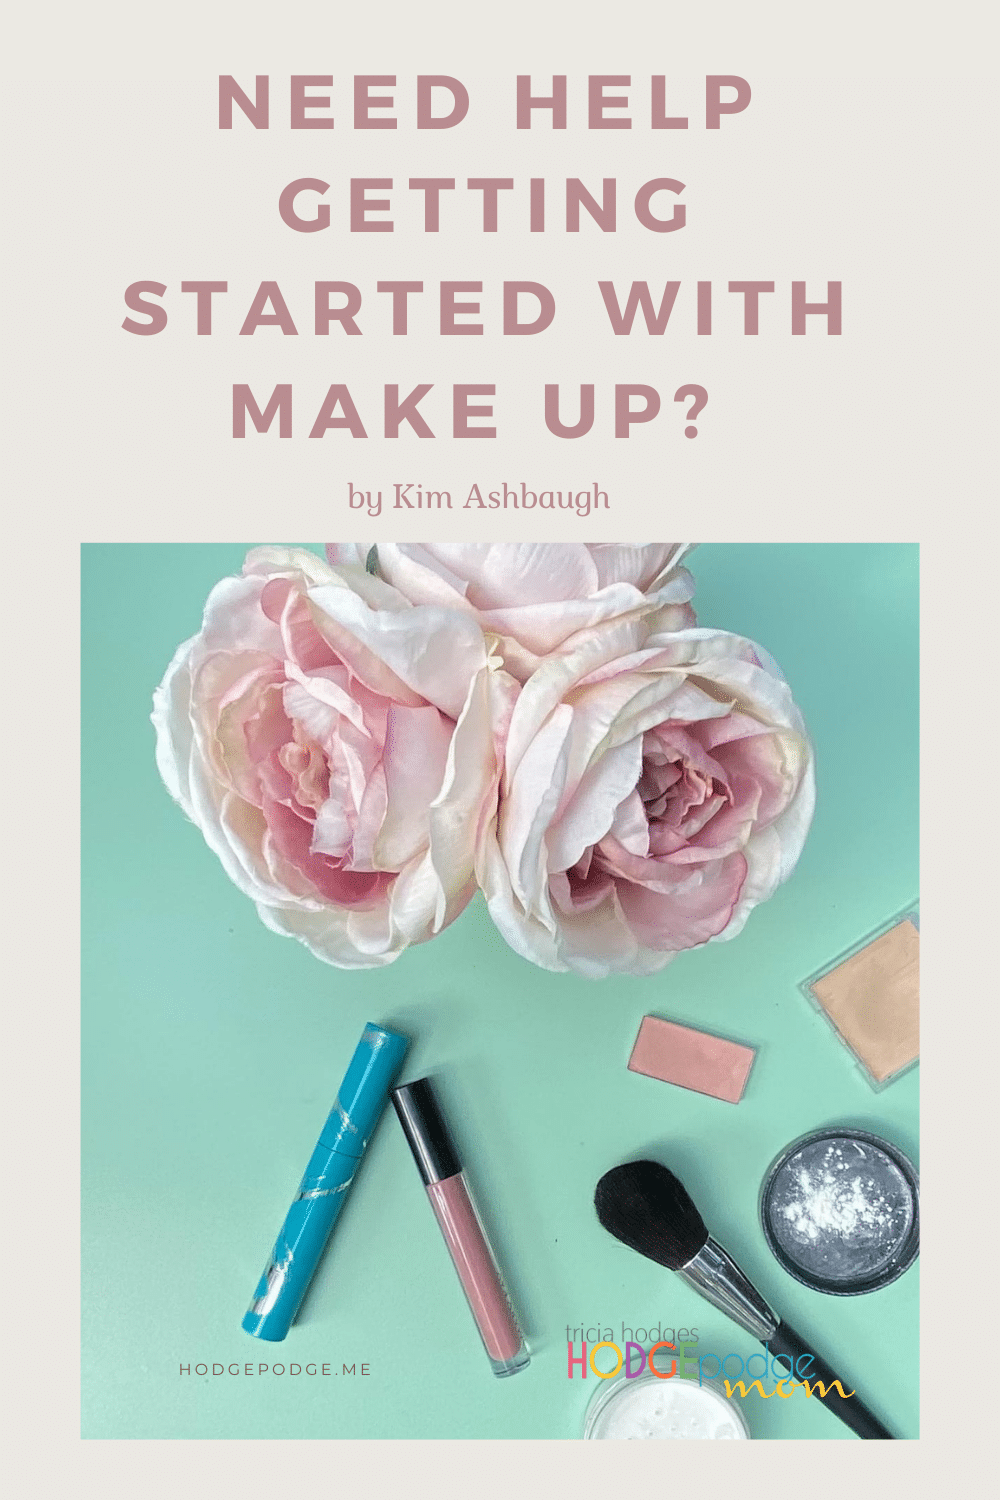 How do you get started with makeup to enhance your natural beauty? Here are some simple ways to apply some subtle color in minimal time.